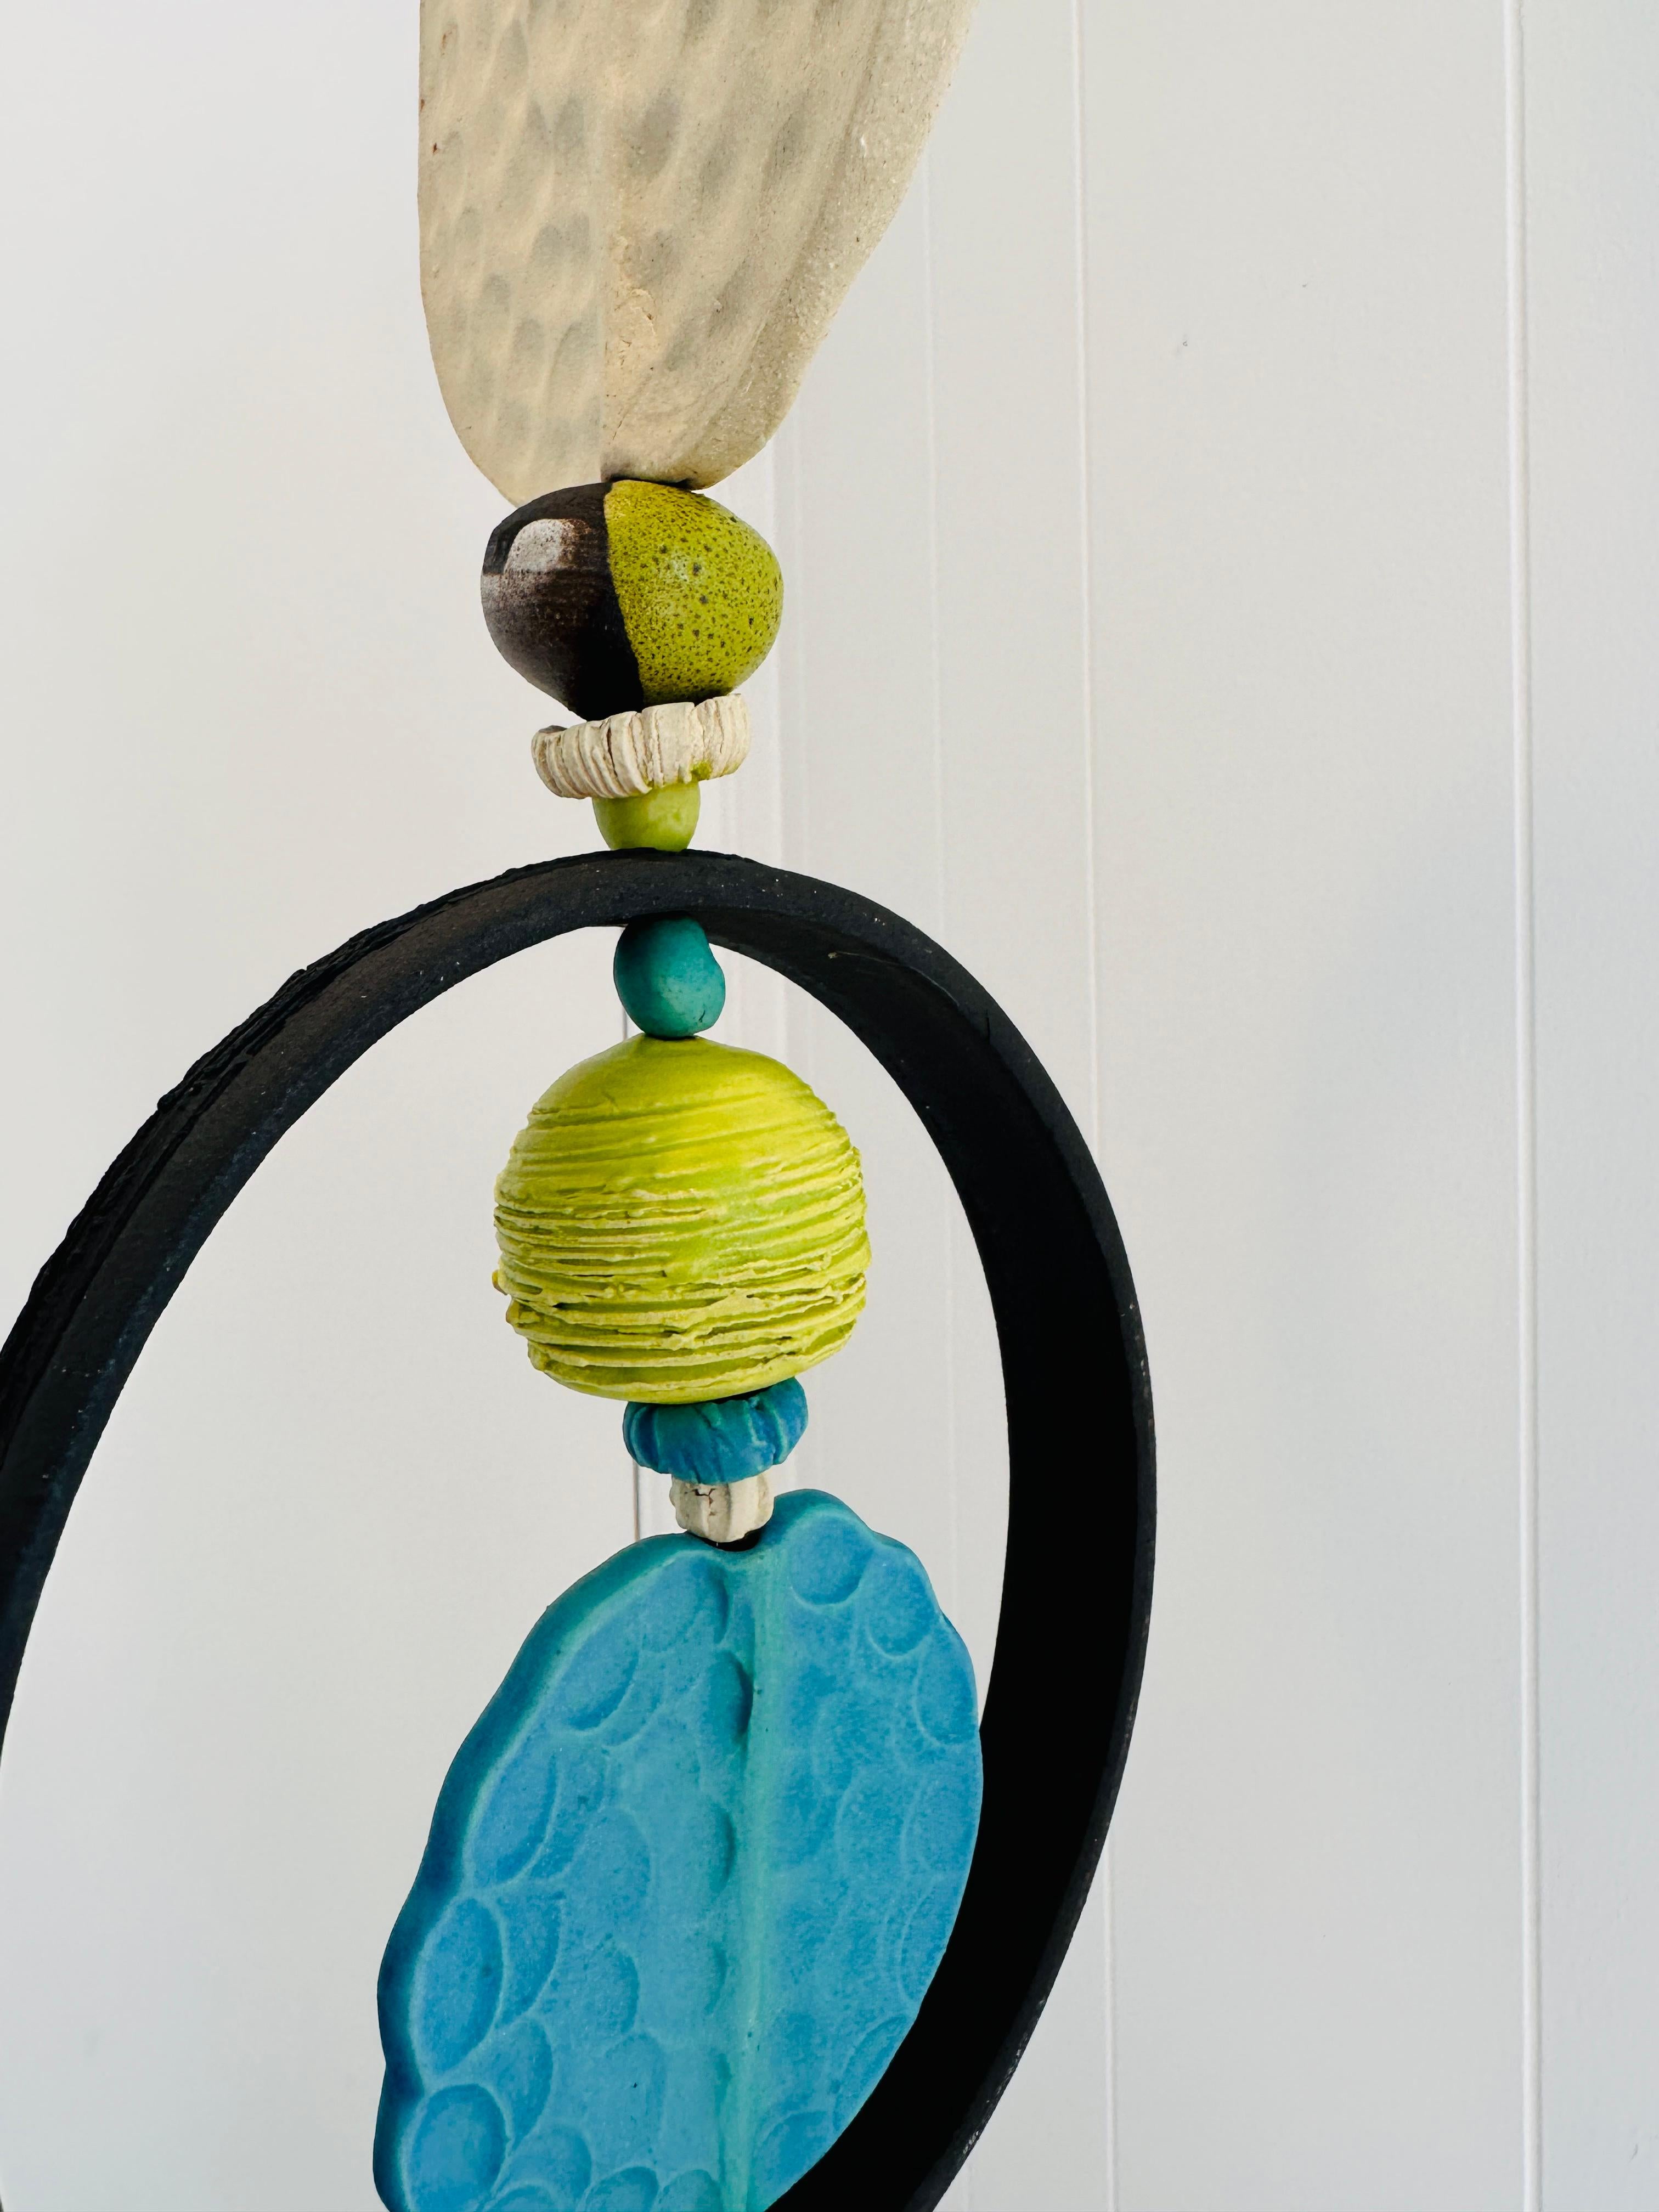 Hand-Crafted Monumental Ceramic Kinetic hanging sculpture hand crafted by Brenda Williams